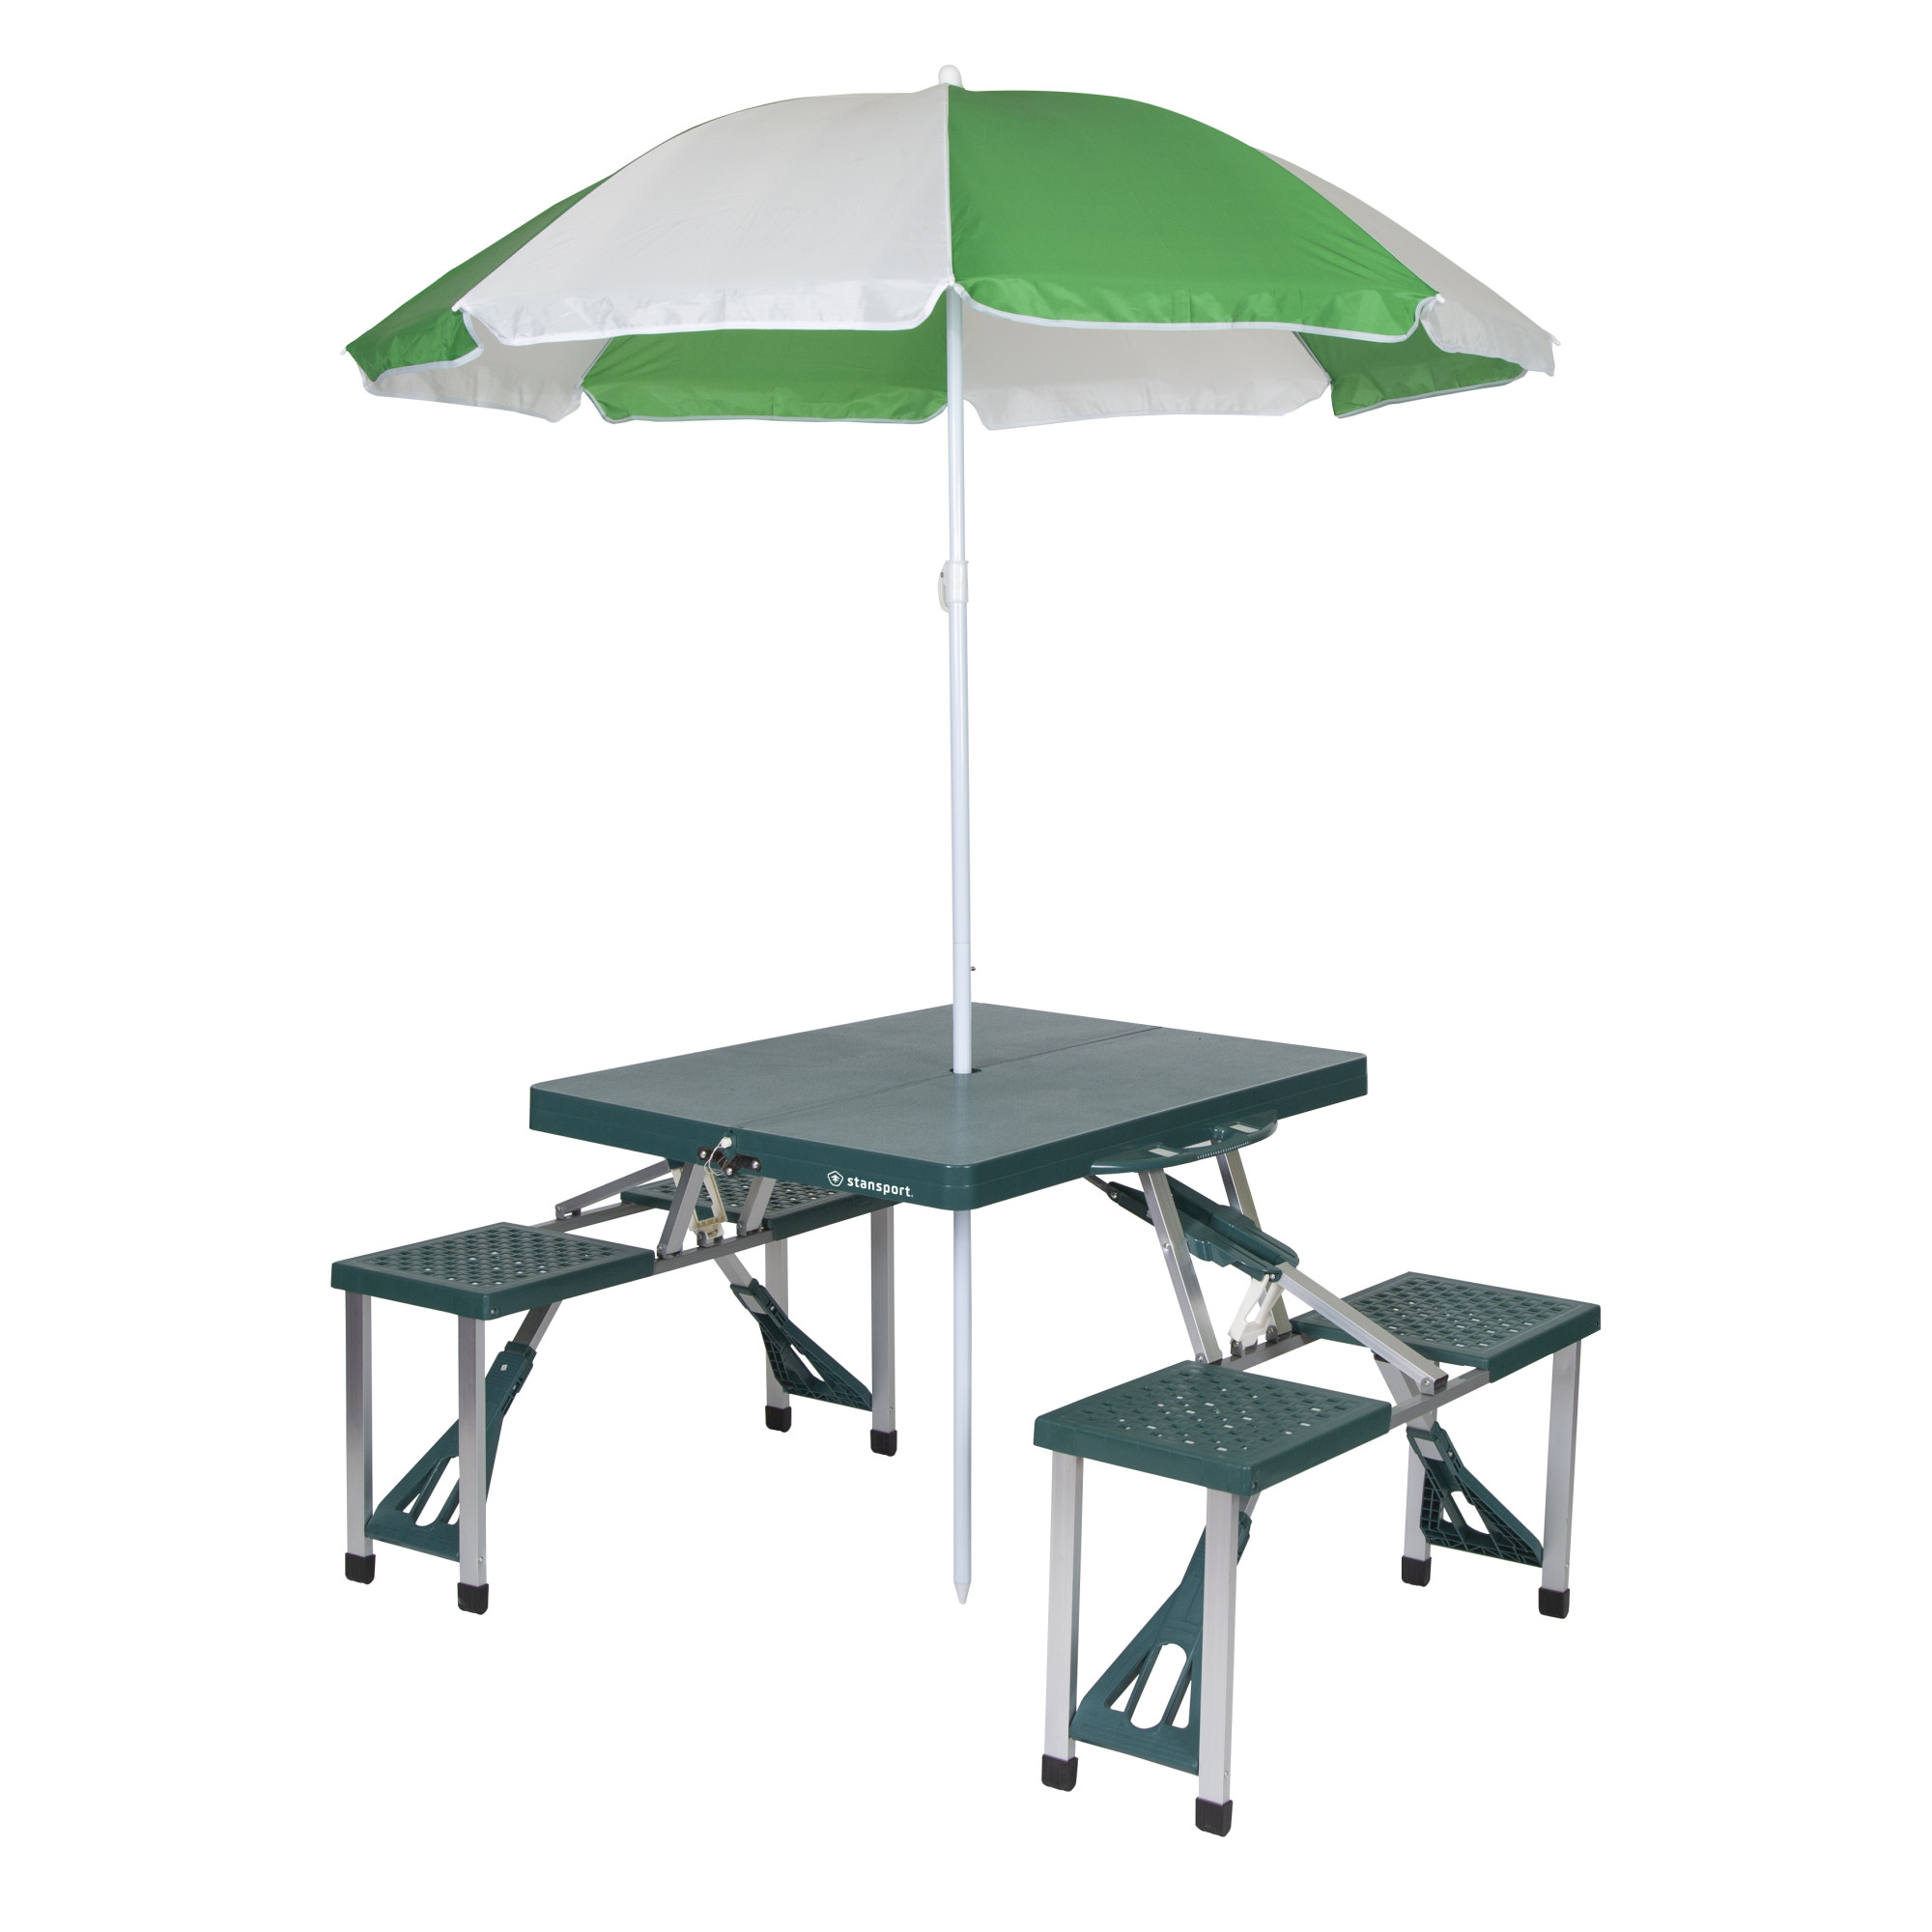 Stansport Folding Picnic Table with Umbrella, Aluminum Frame - image 1 of 14